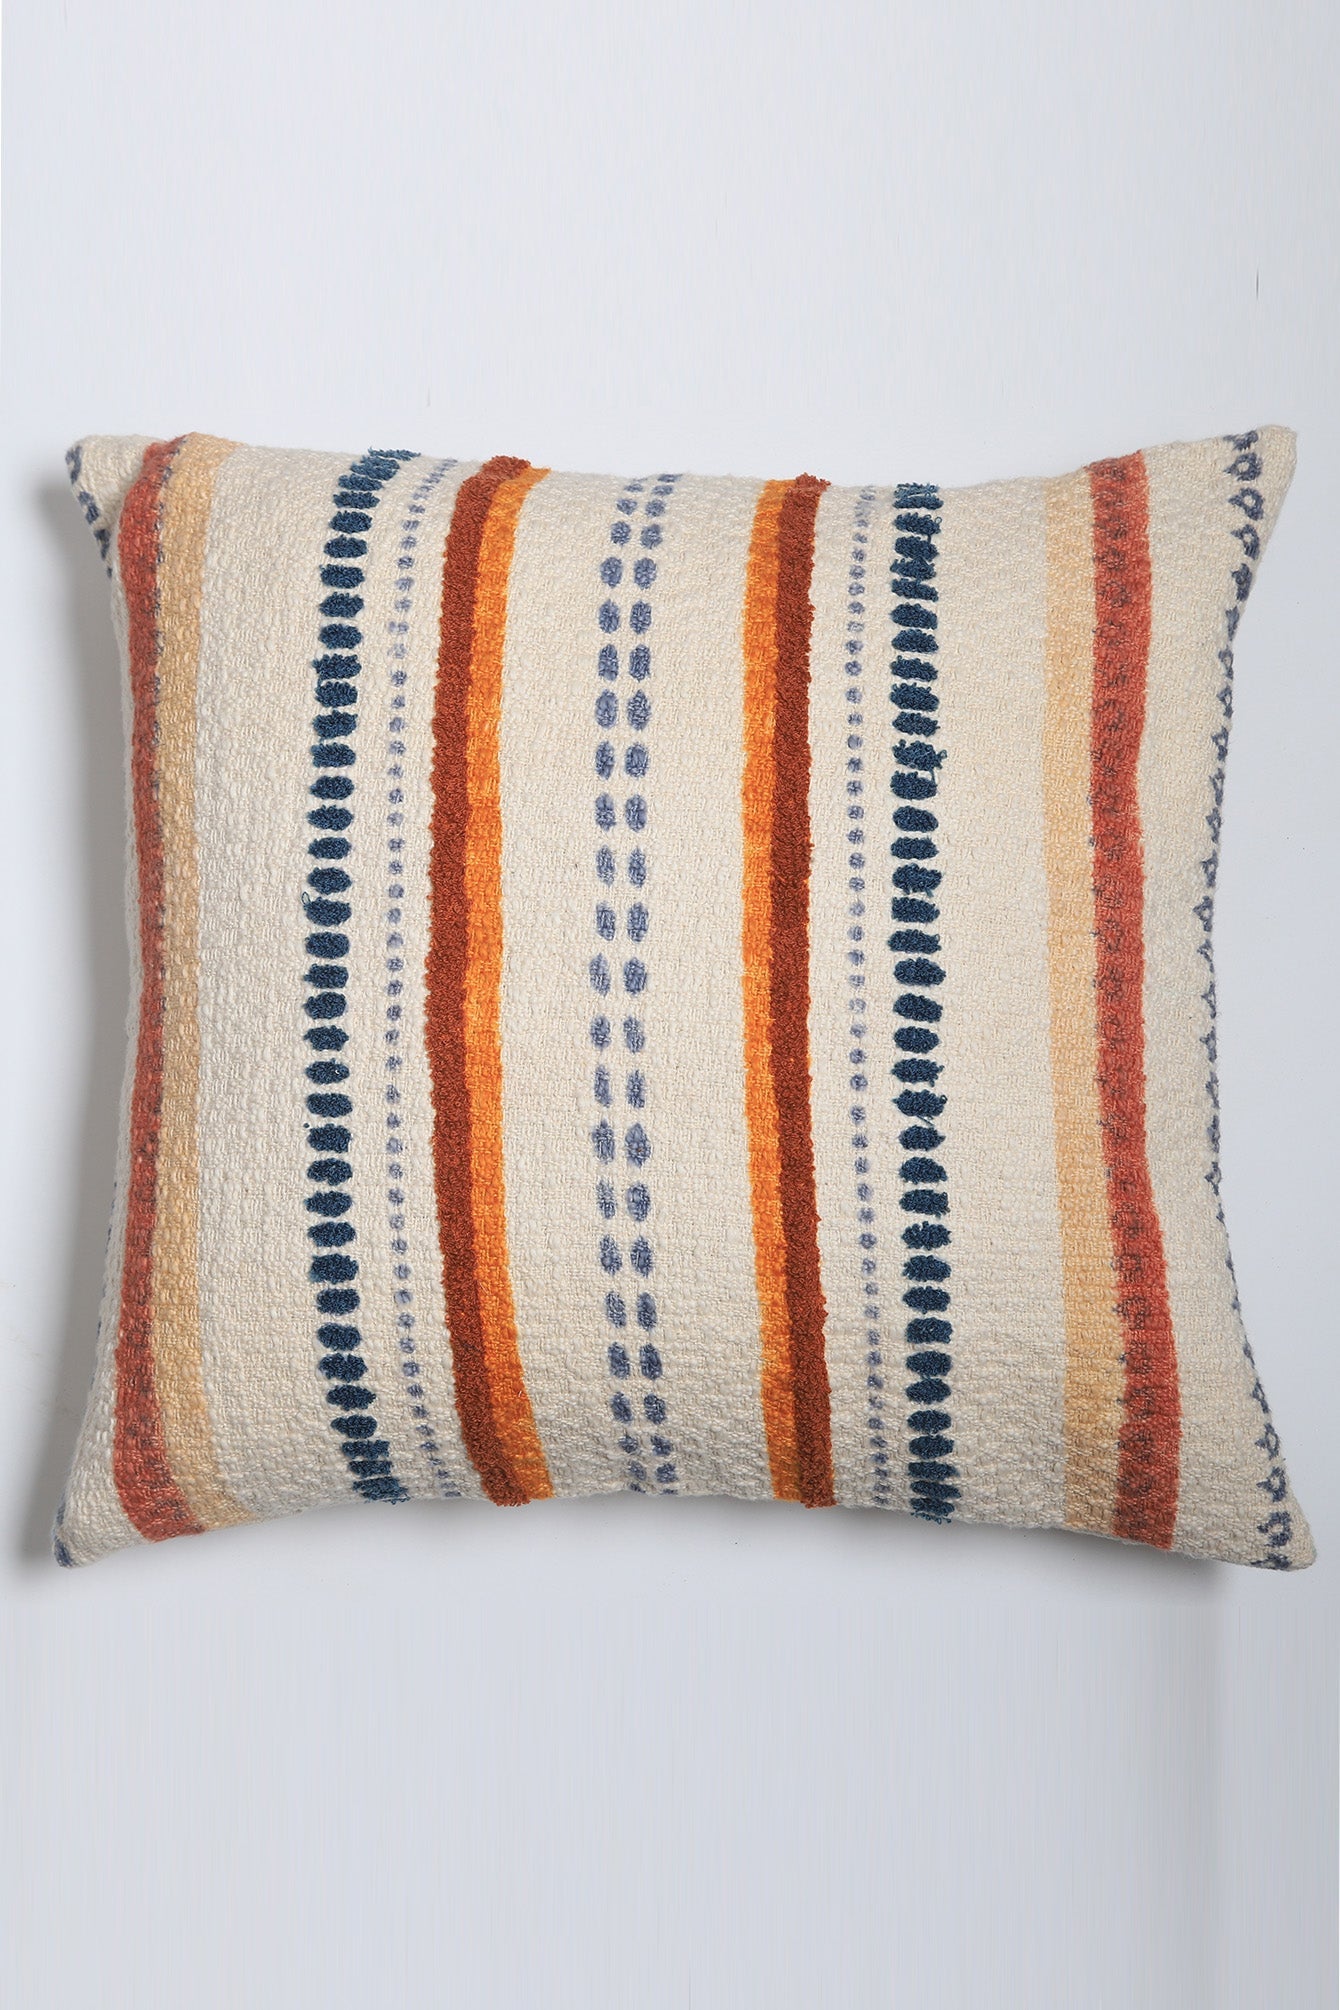 Visoko Embroidery Over Block Printed Cushion Cover